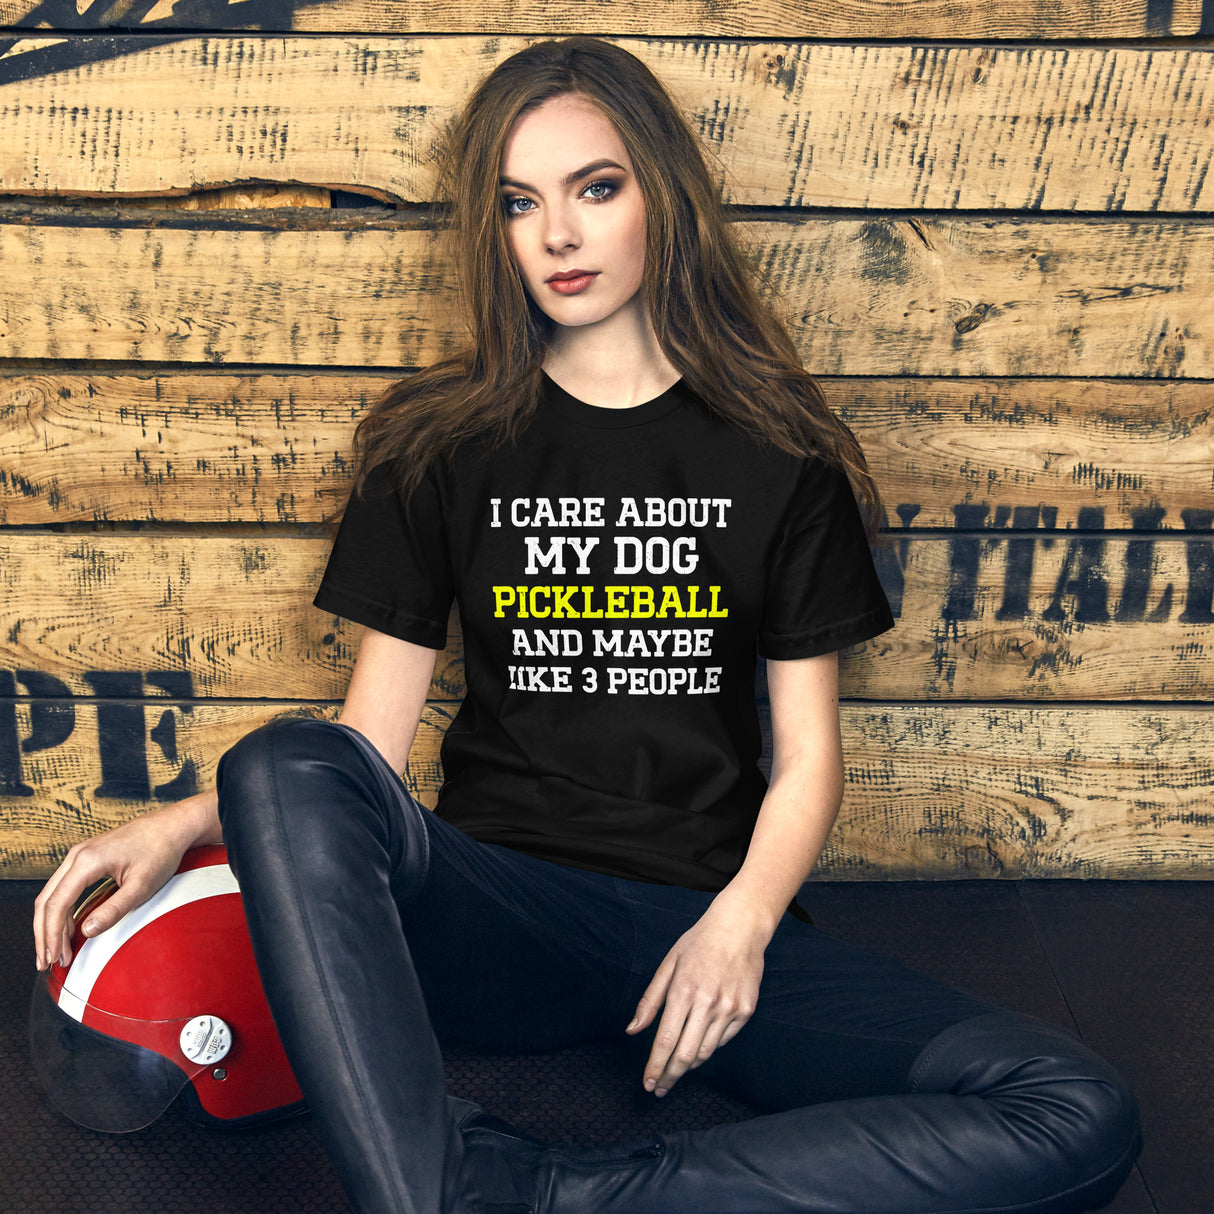 I Care About My Dog and Pickleball Women's Shirt